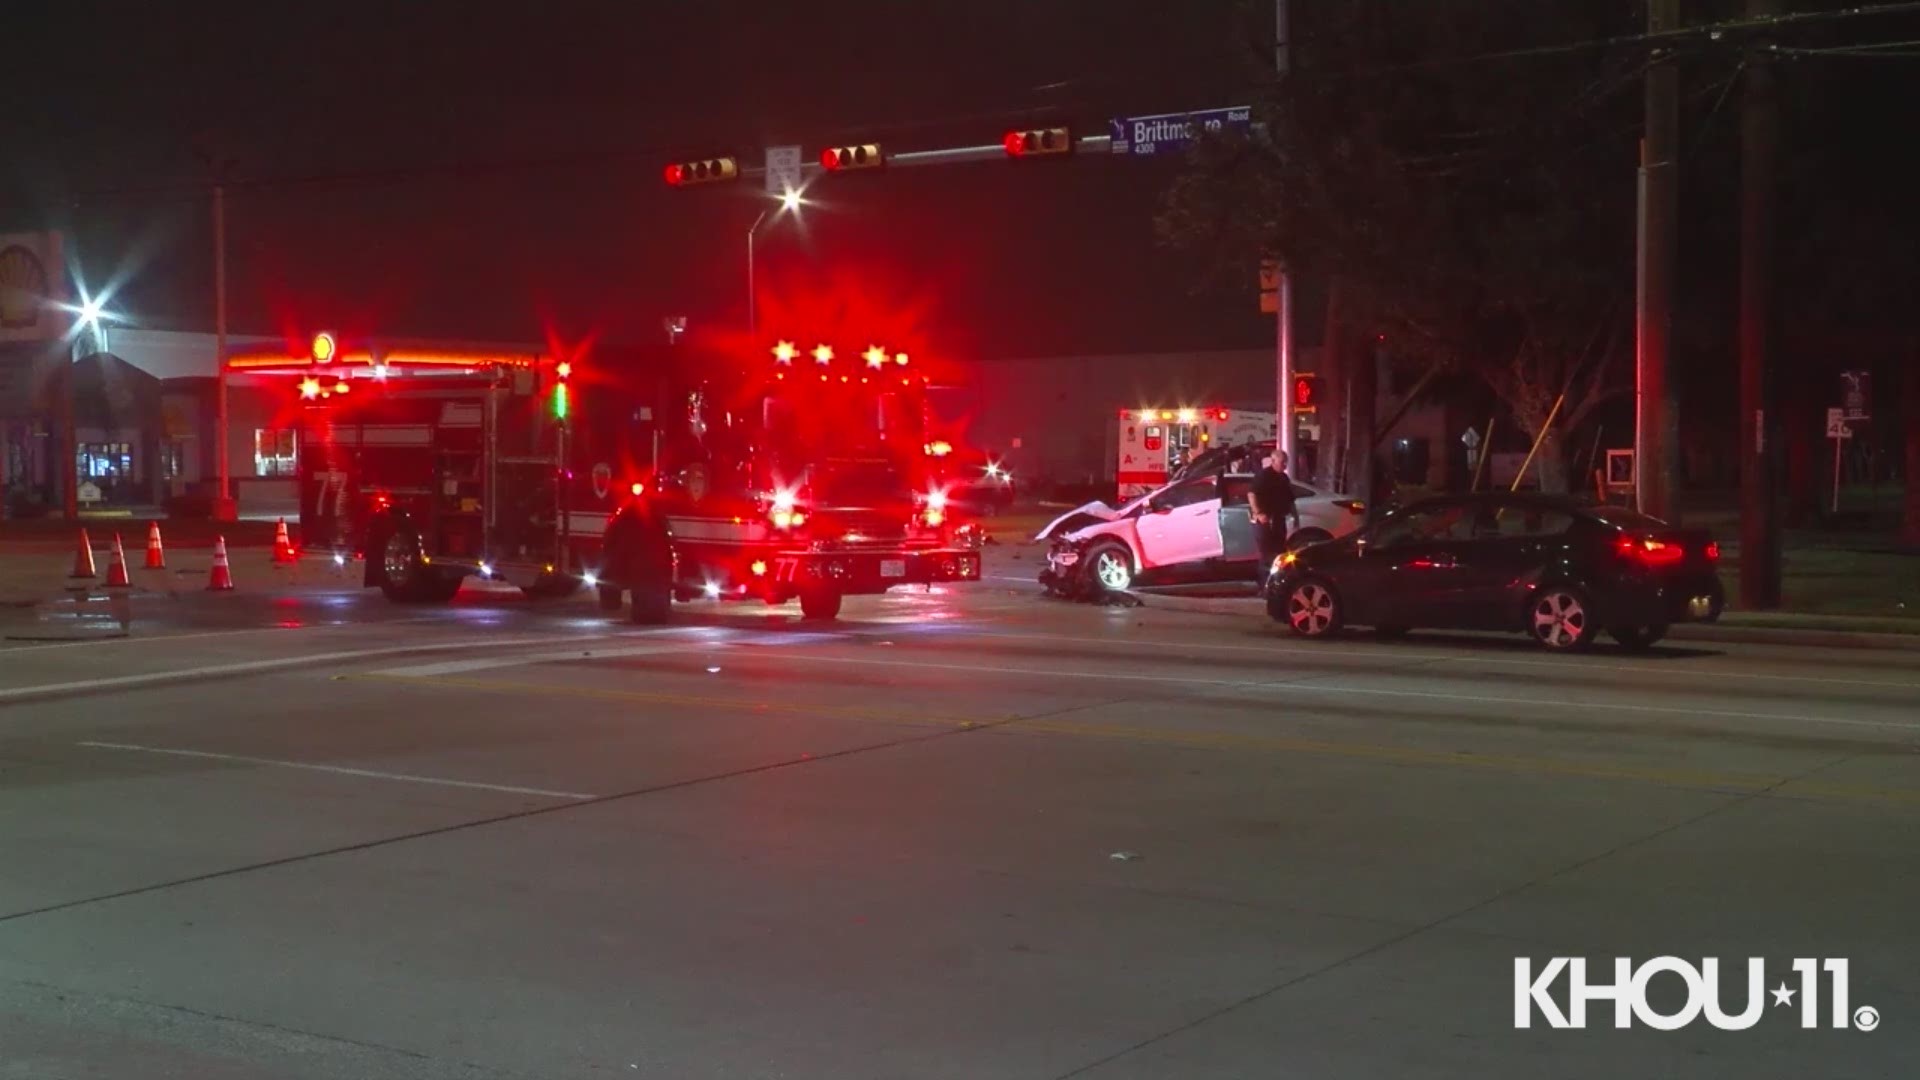 Police are trying to determine who ran a red light in a deadly two-vehicle collision at a northwest Houston intersection overnight.